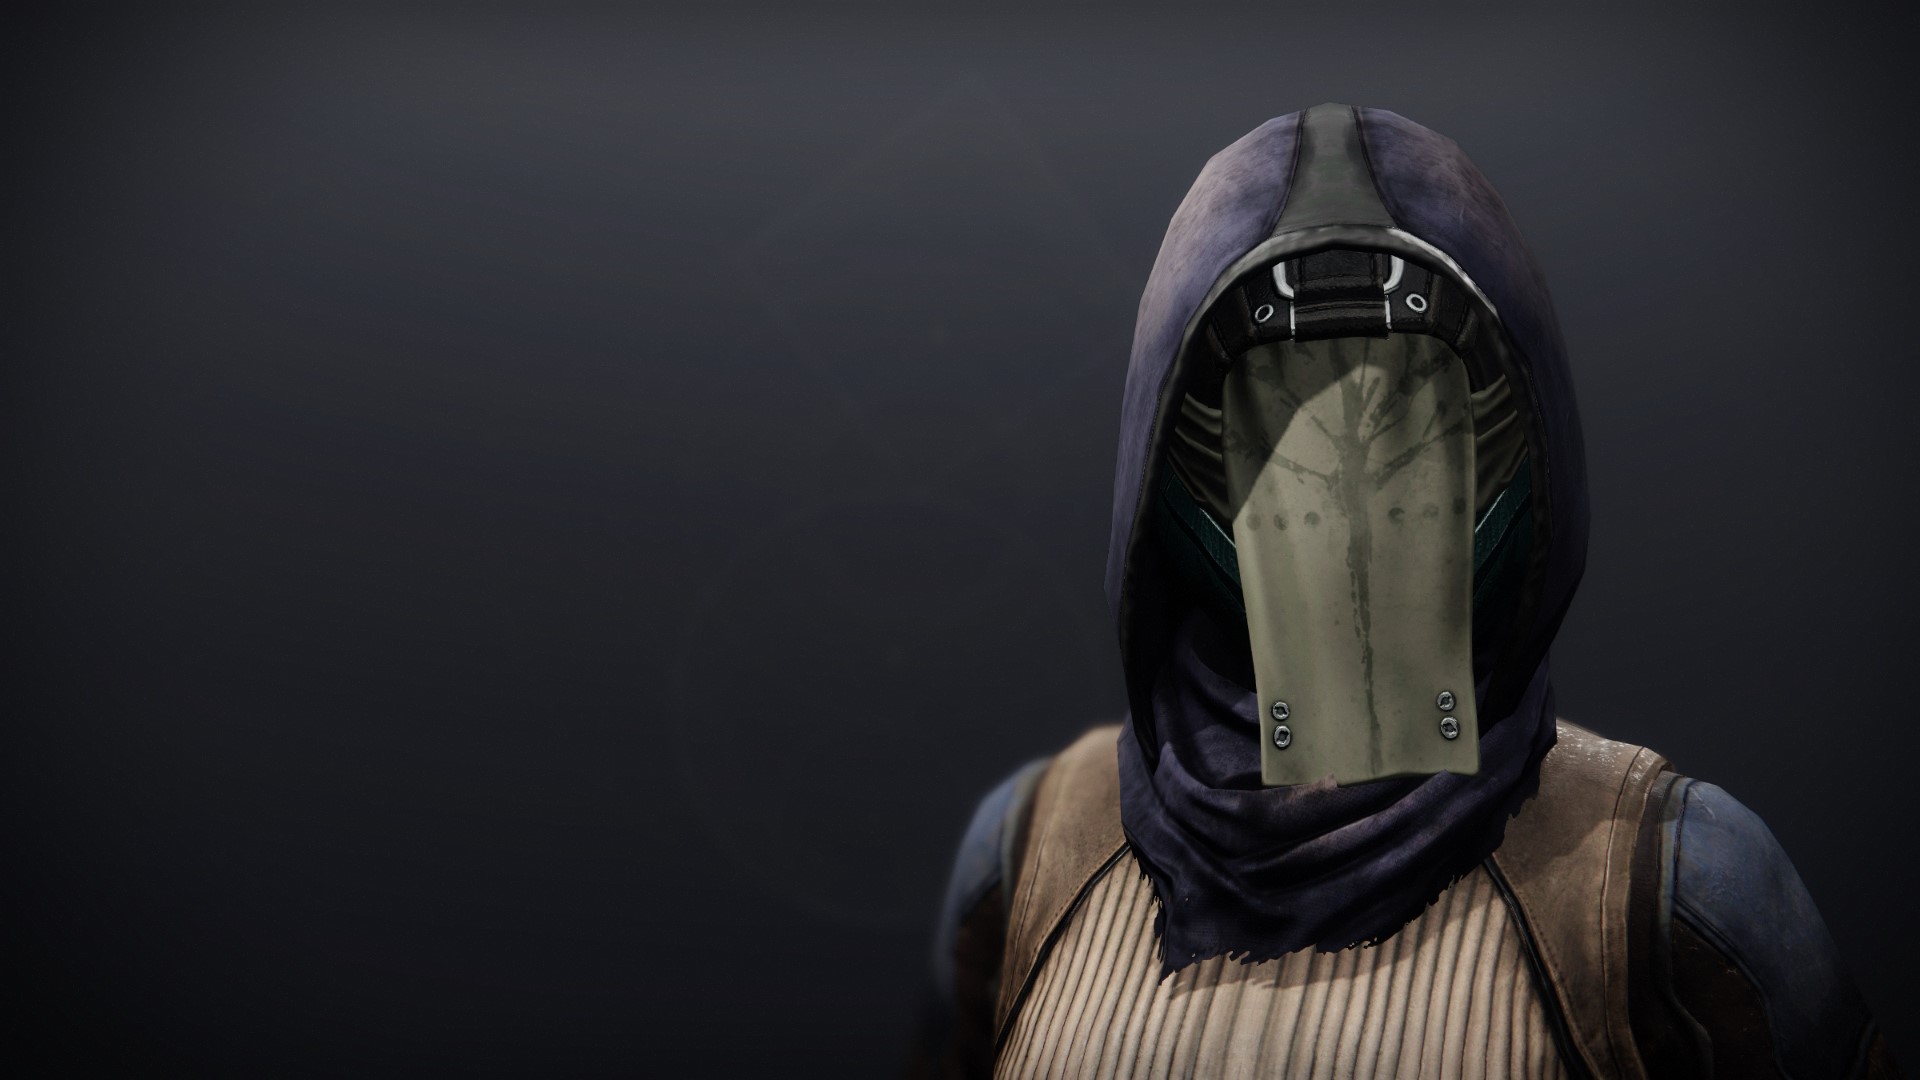 An in-game render of the Iron Forerunner Mask.